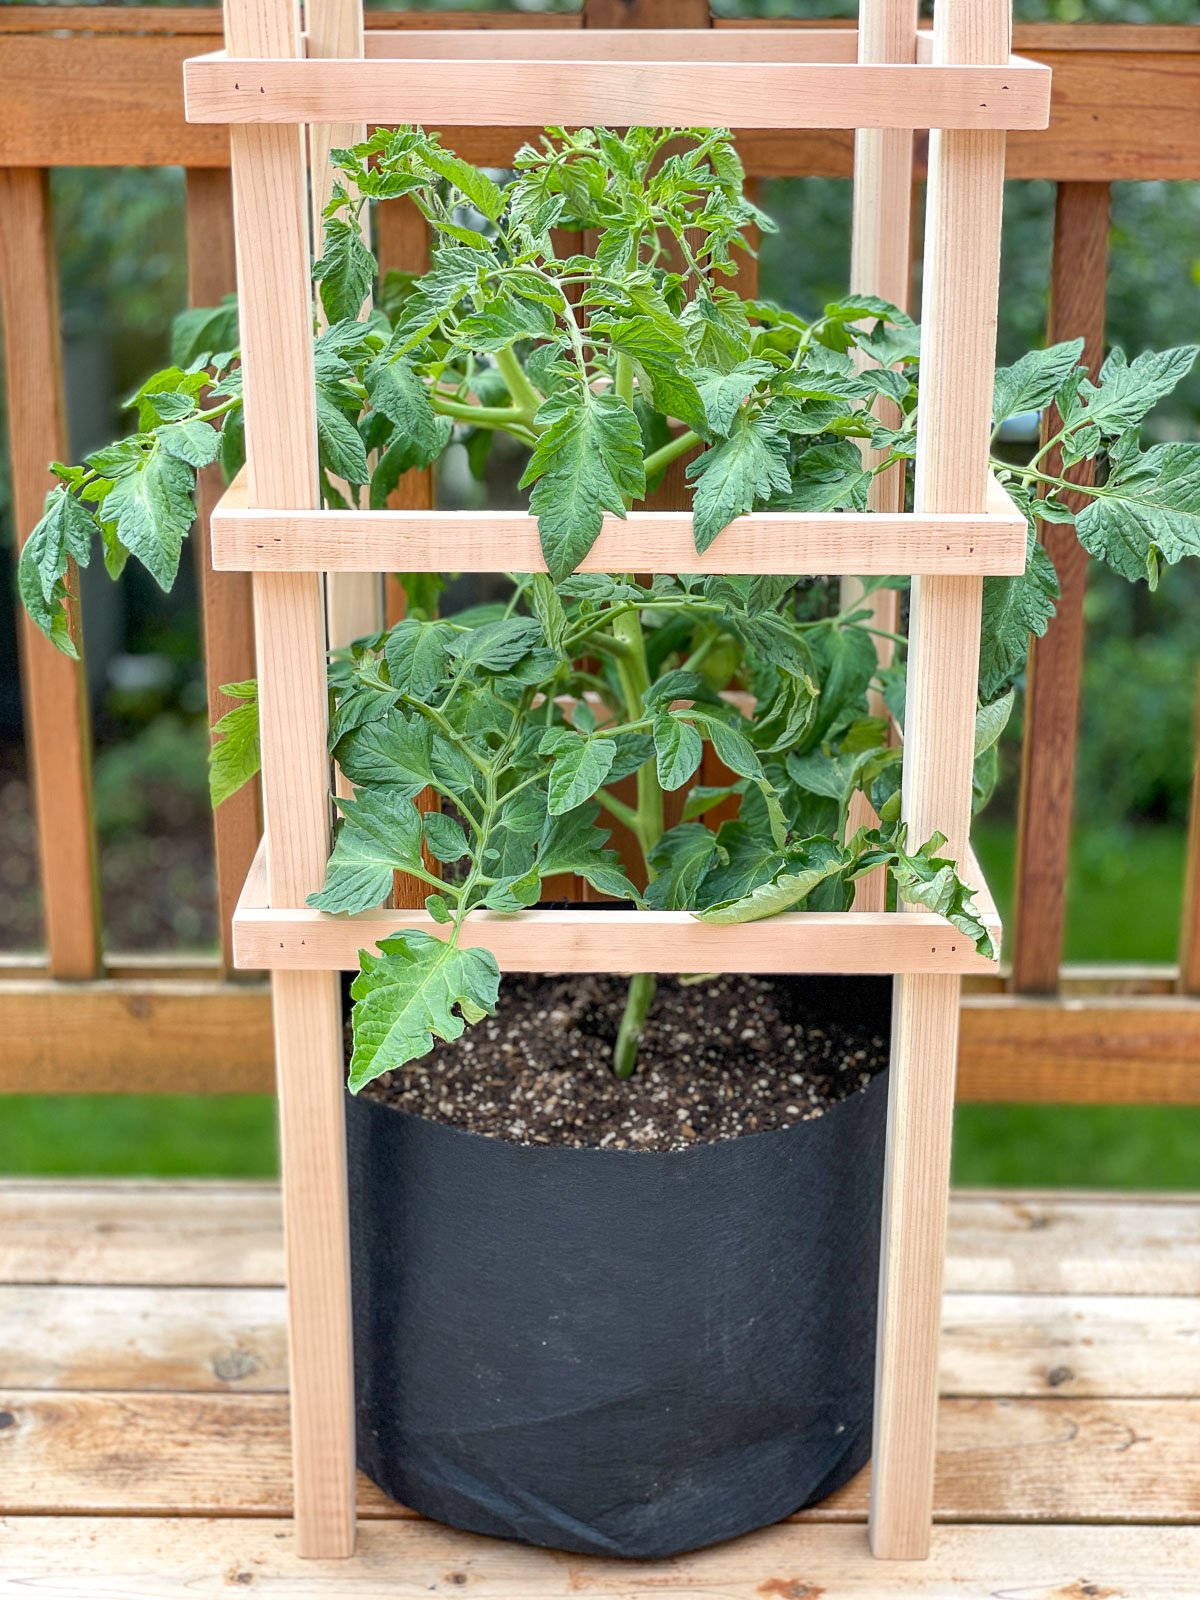 wooden tomato cage around tomato plant growing in a grow bag